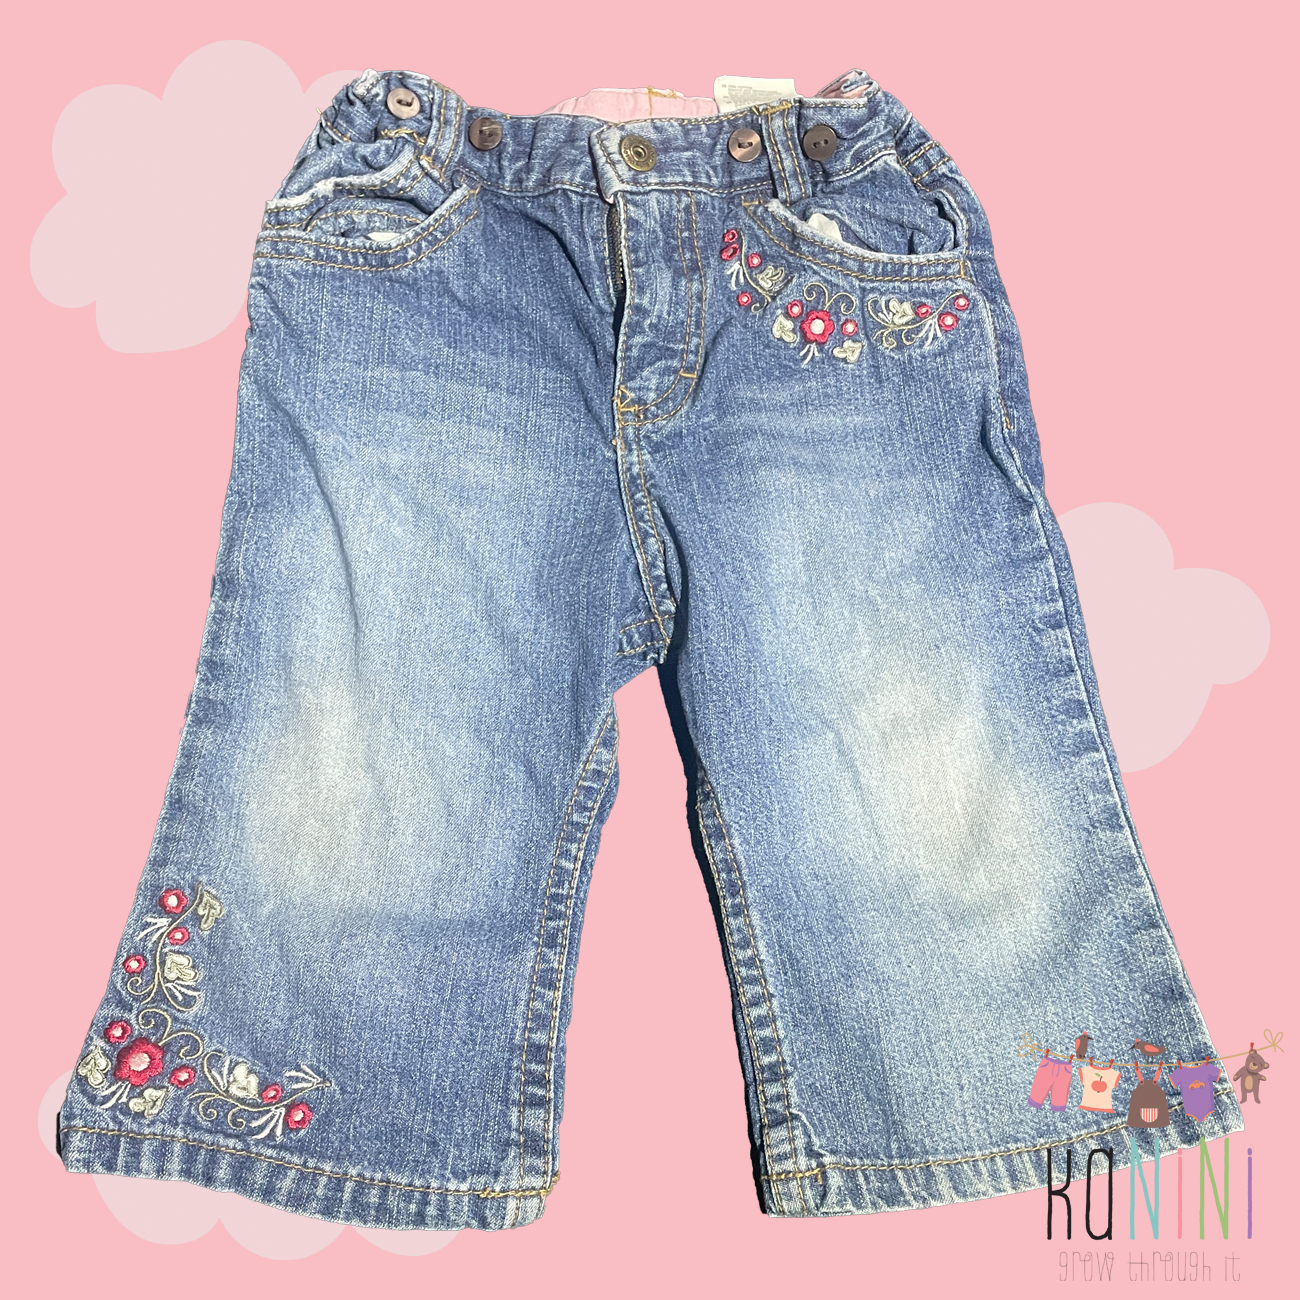 Featured image for “H&M 6 - 9 Months Girls Jeans With Floral Detail”